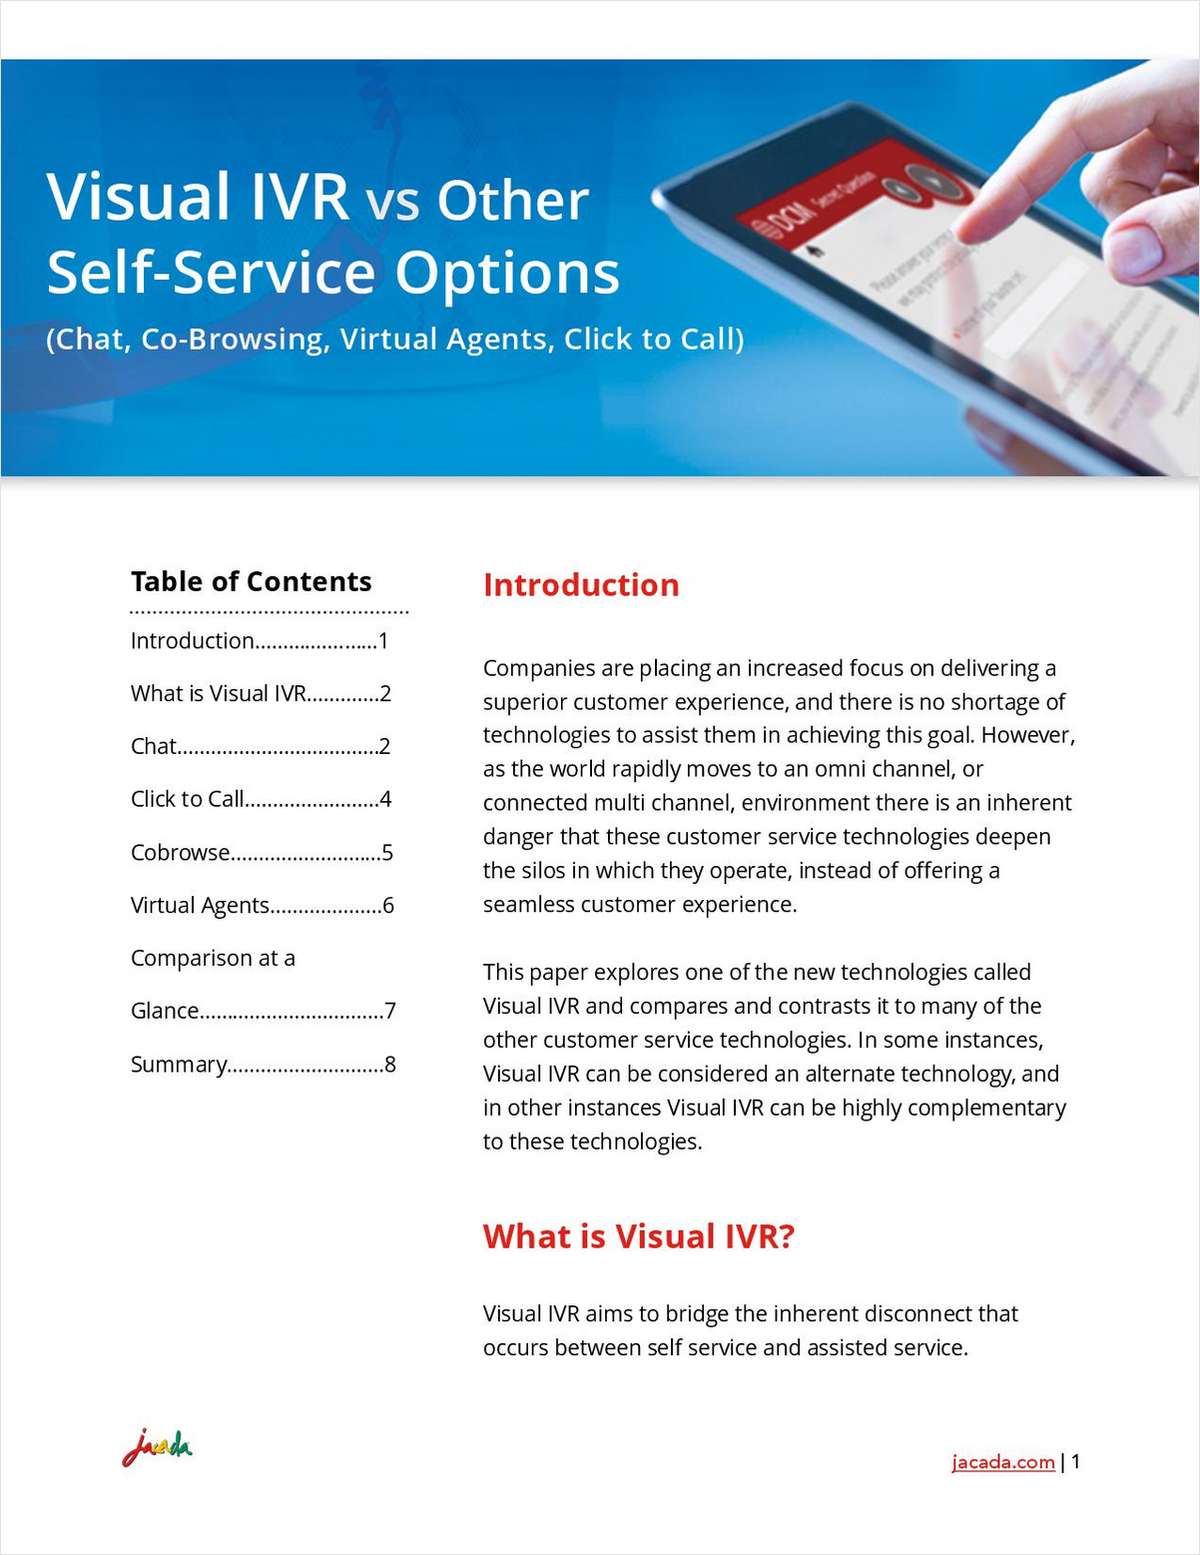 Visual IVR vs Other Self Service Options (Chat, Click to Call, Co-browse, Virtual Agents)